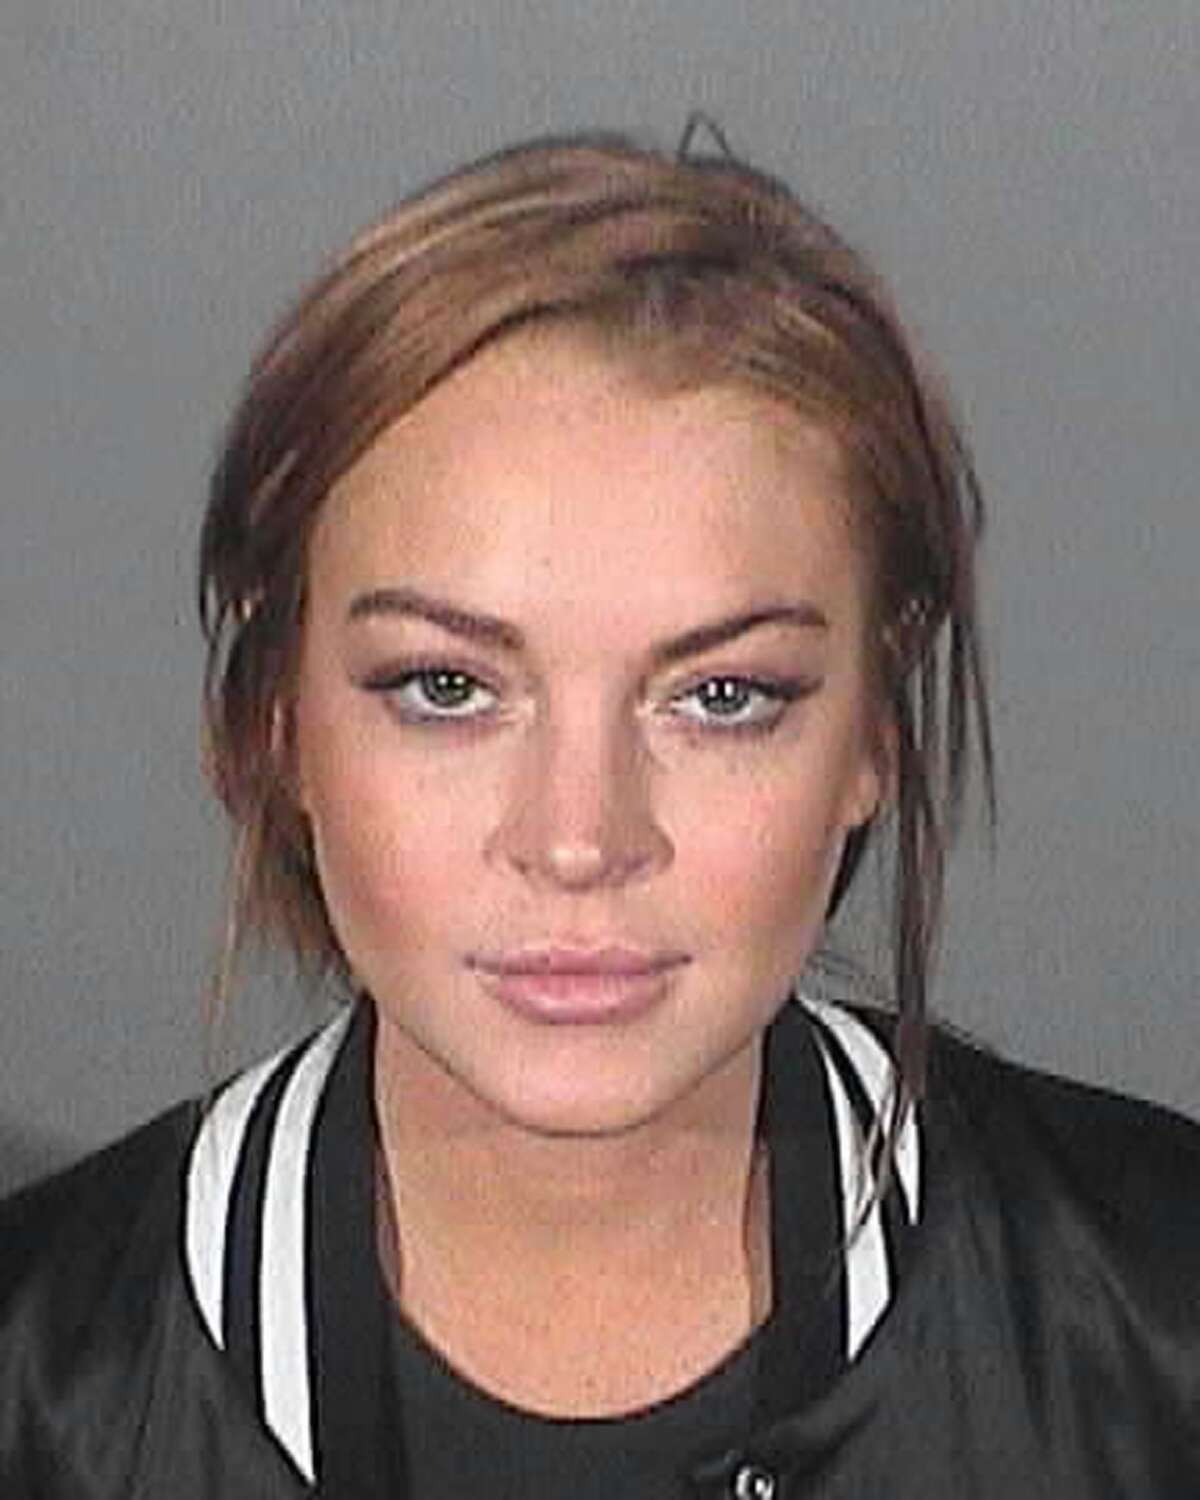 2013: This photo provided by the Santa Monica Police Department shows the most recent booking photo of Lindsay Lohan. The troubled 26-year-old actress accepted a plea deal on Monday, March 18, 2013, in a misdemeanor car crash case that includes 90 days in a locked-down rehabilitation facility that she won't be able to leave.